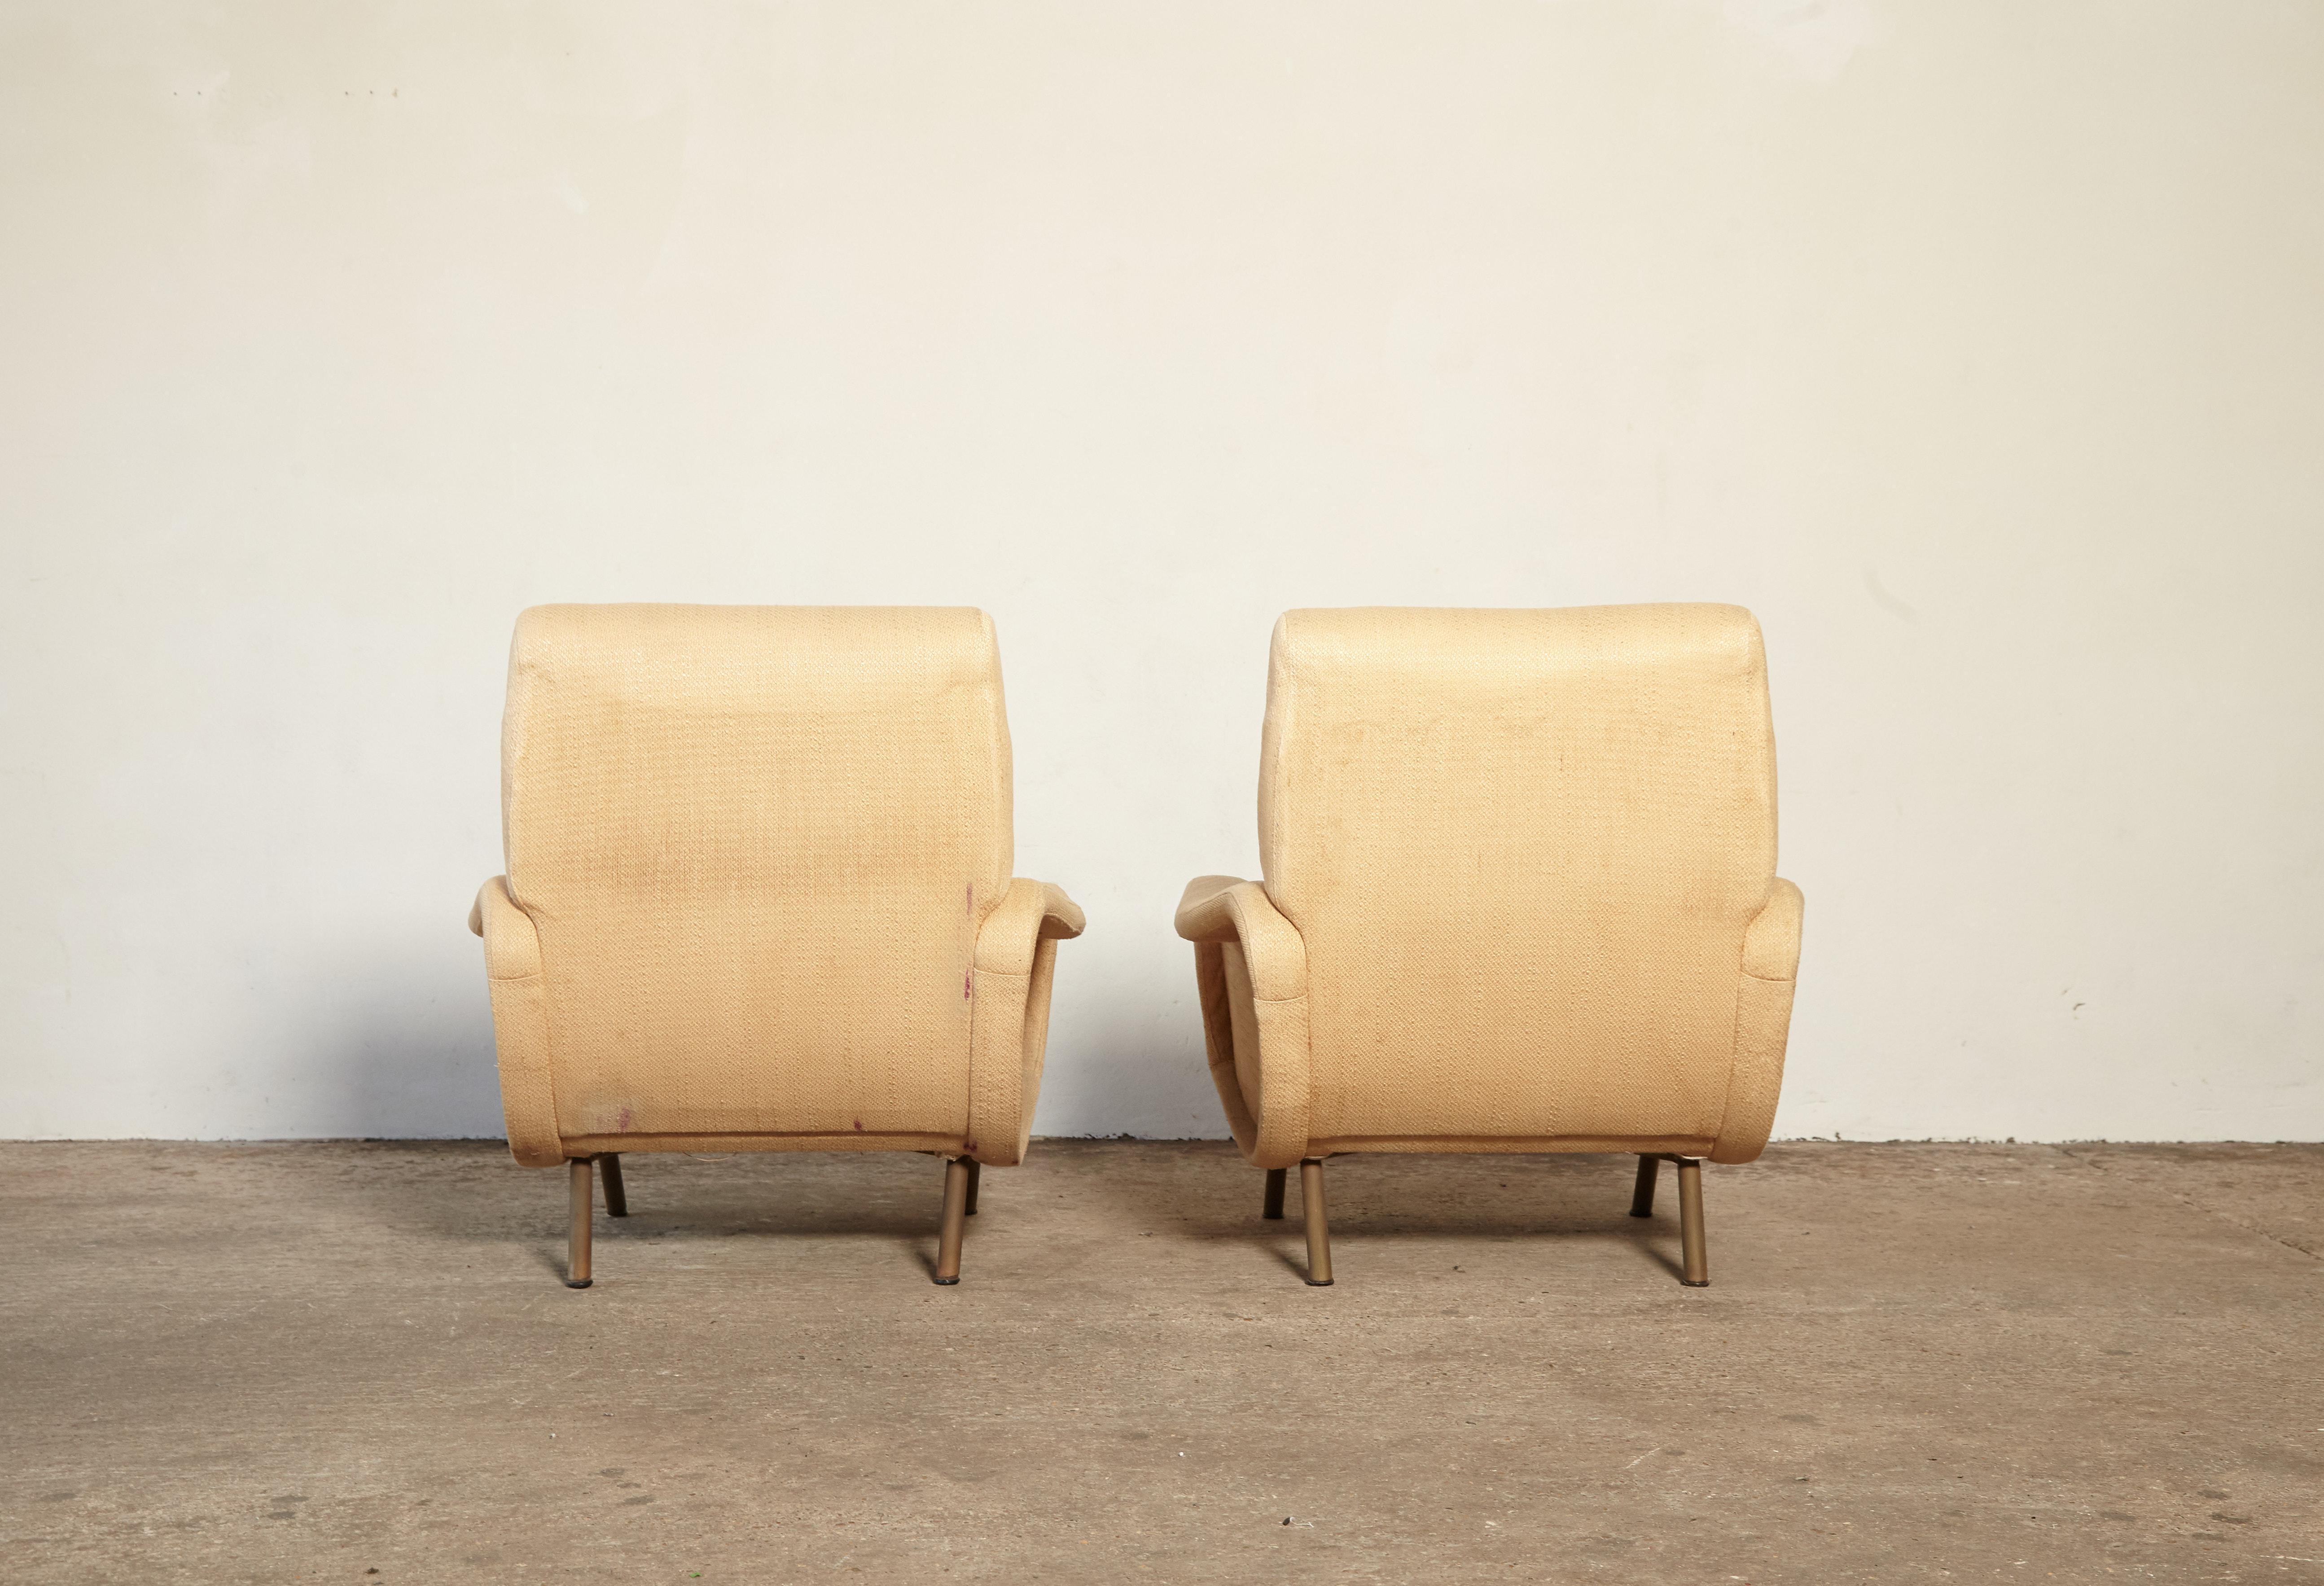 Brass Marco Zanuso Lady Chairs, Arflex, Italy, 1960s 'Complimentary Reupholstery'